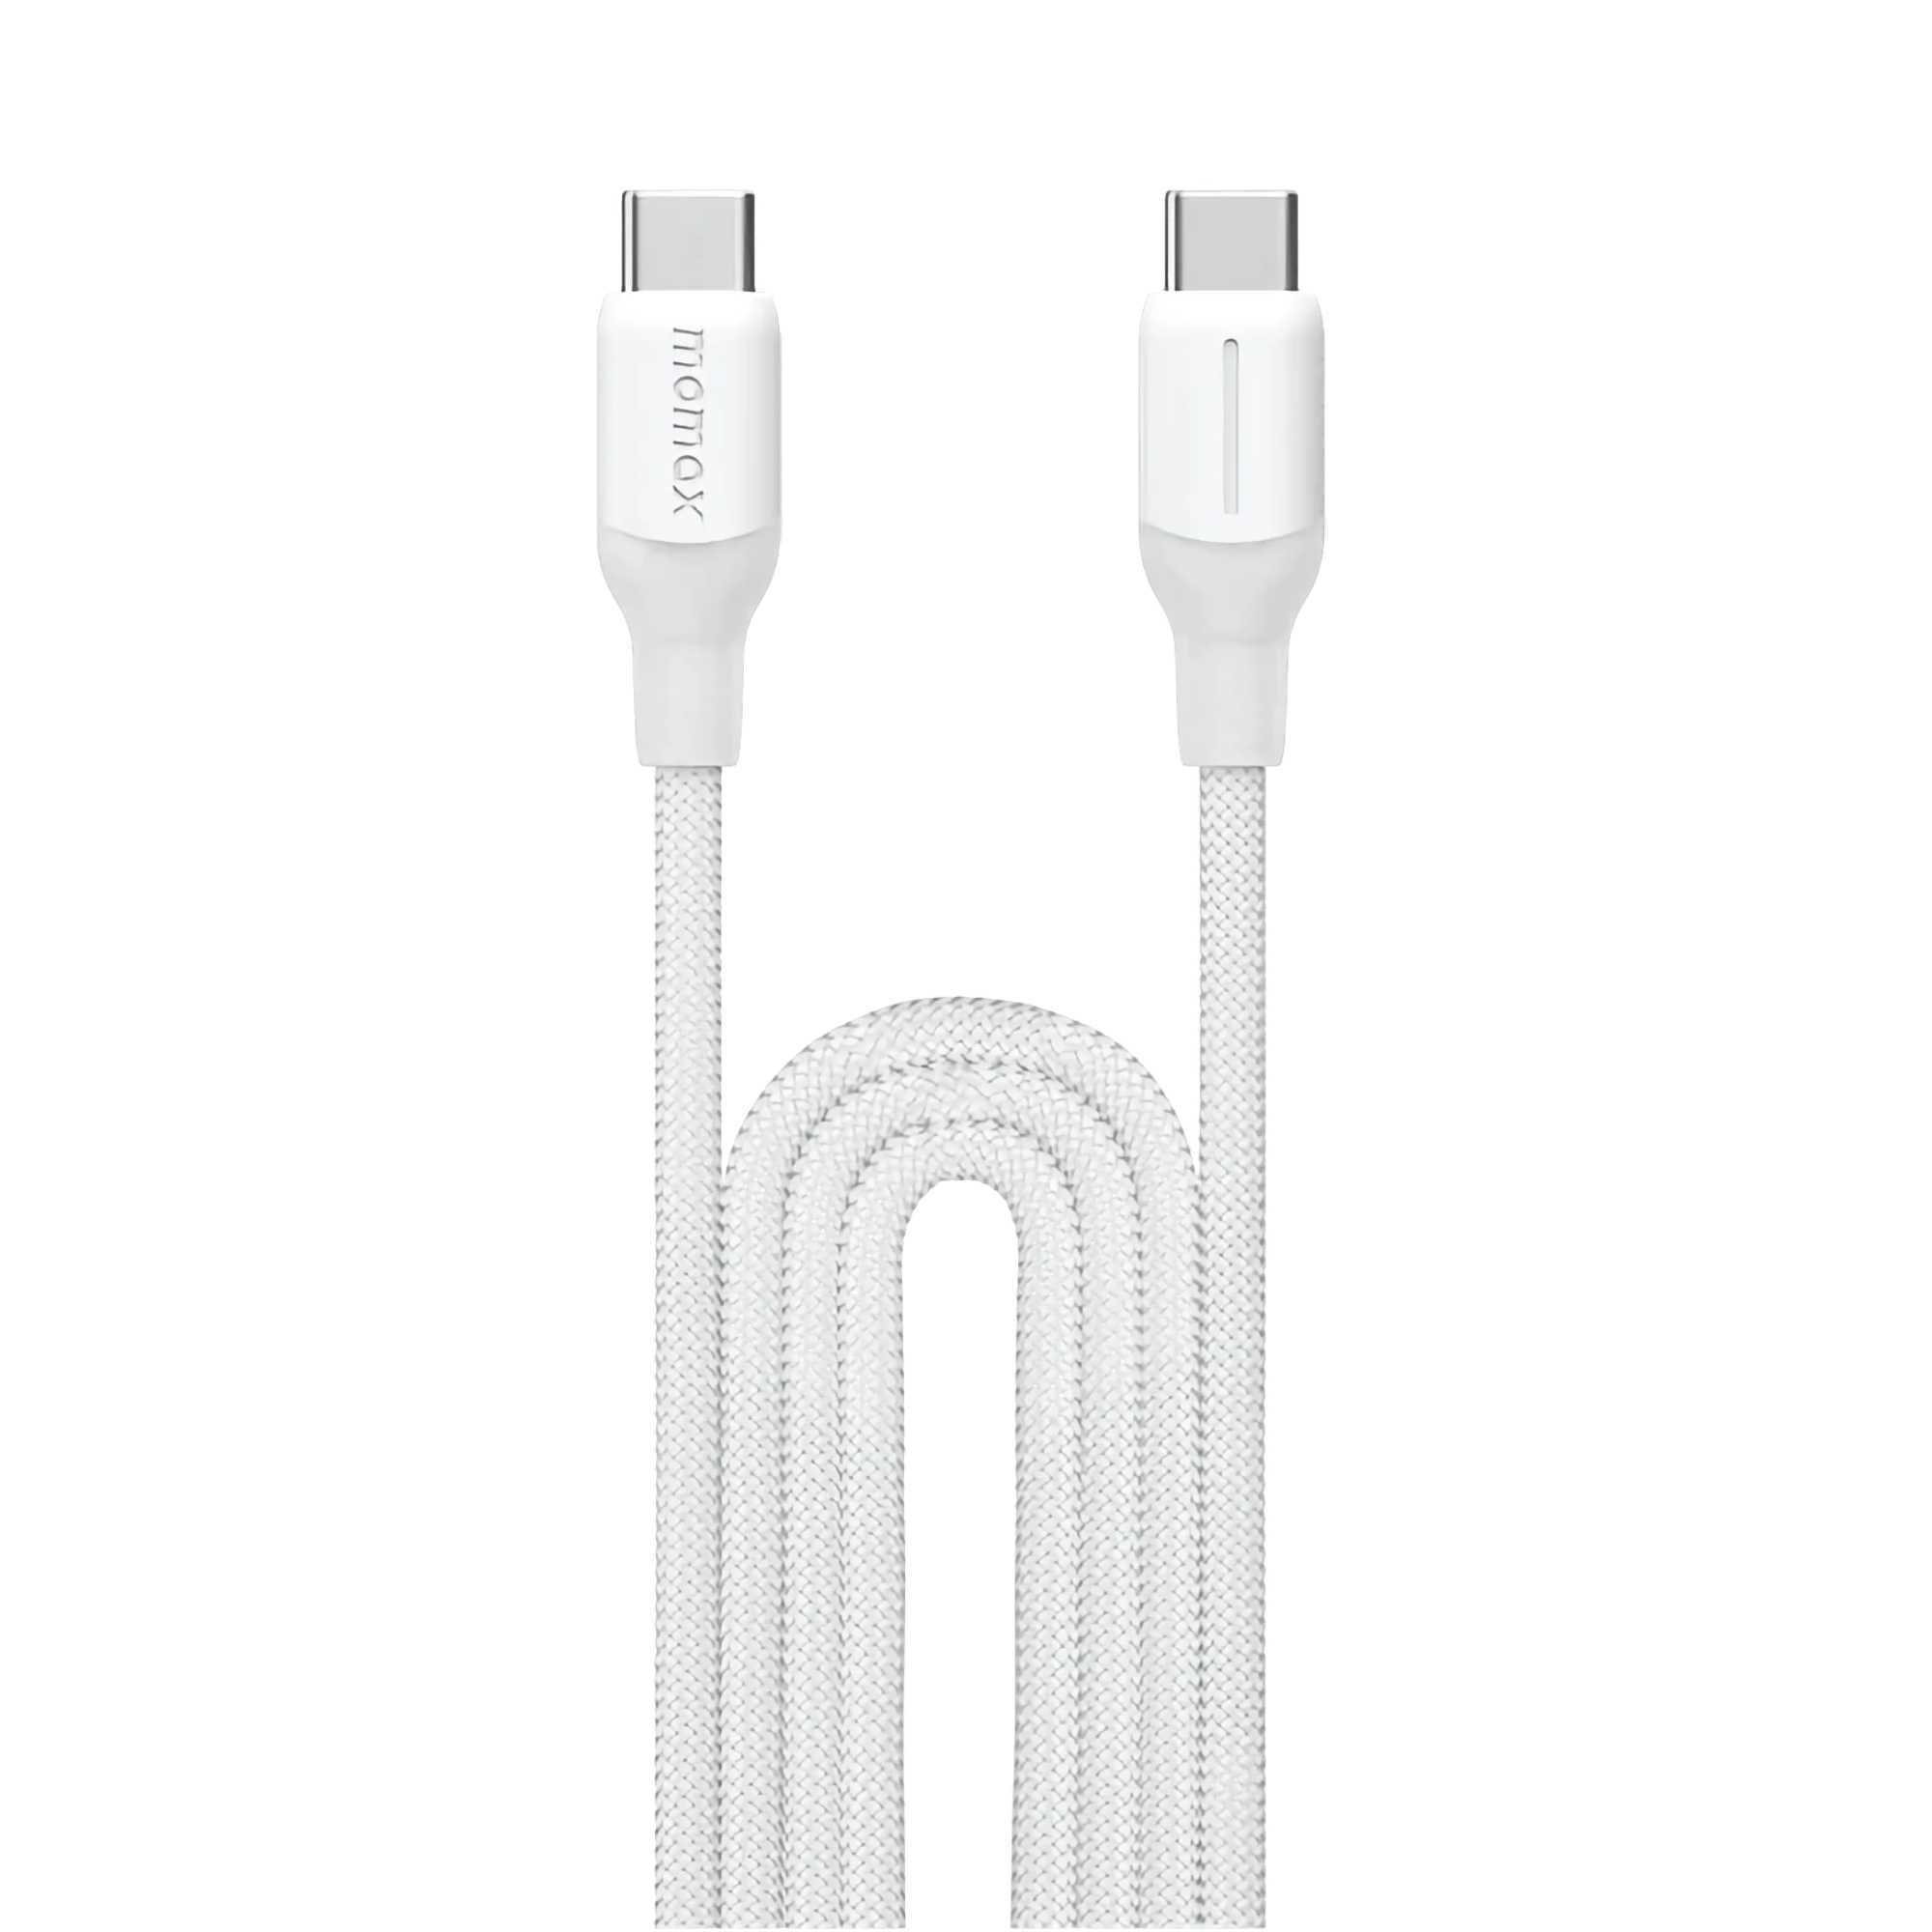 Momax 1-Link Flow CC 100W USB-C Braided Cable (2m), White